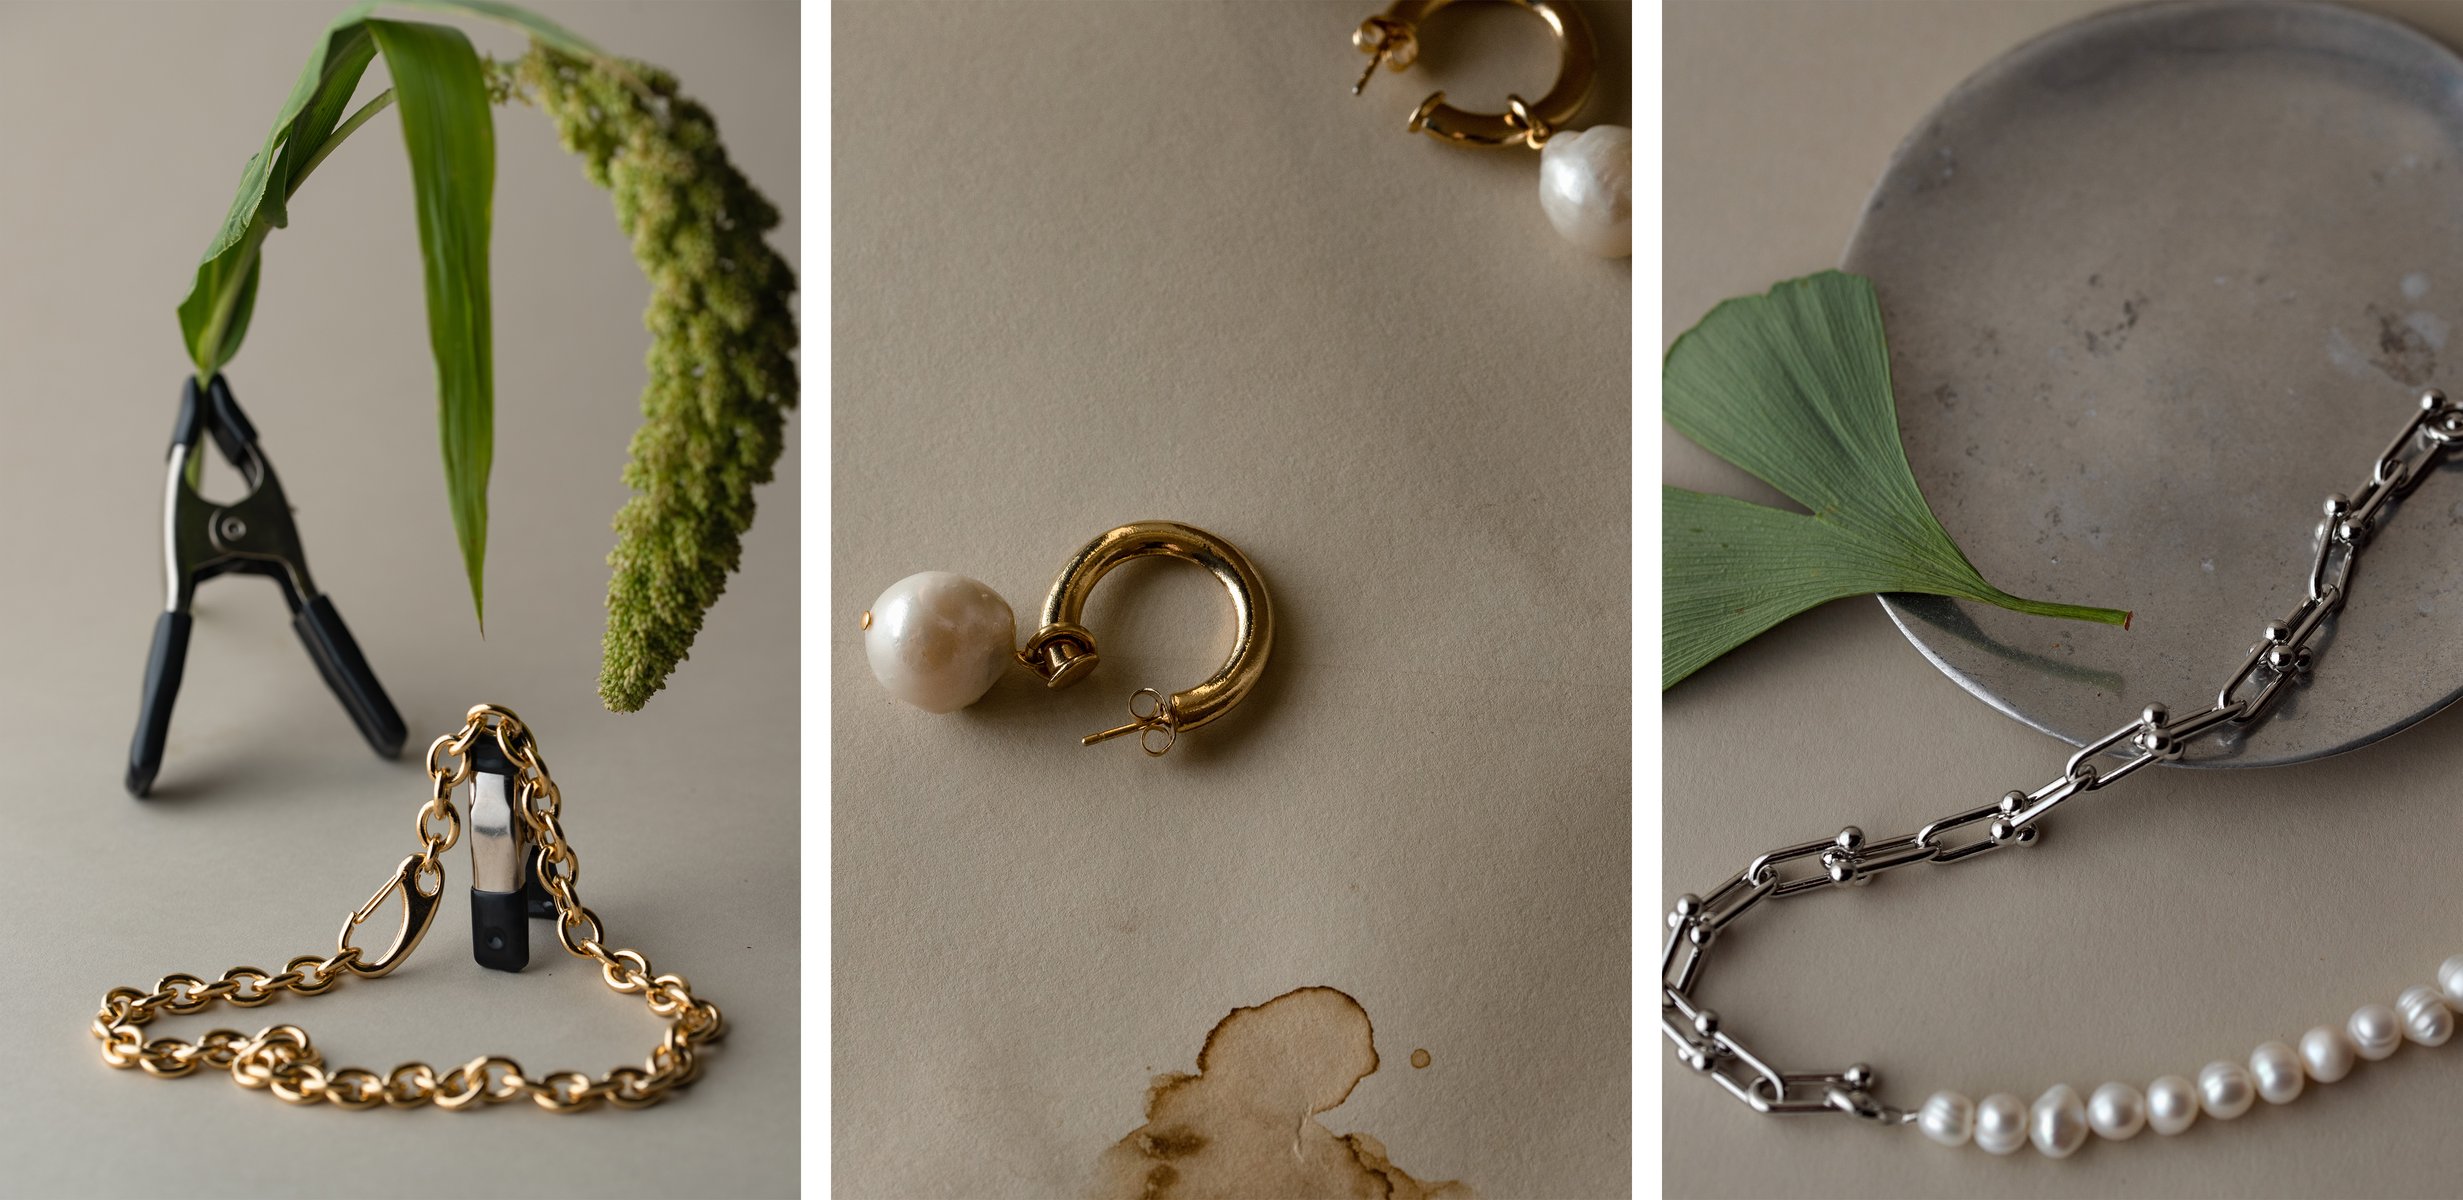  Triptych:

Left image: two black rubber and silver clamps - the larger clamp is supporting a green stem of amaranth that is leaning across the frame, the second clamp is draped with a large gold chain.

Center image: a close-up of two small, golden hoop earrings with pearls on a sheet stained, beige paper.

Right image: a silver Tiffany chain with pearls draped across a sheet of beige paper, next to a round pewter dish and a bright green gingko leaf. by Sydney SG